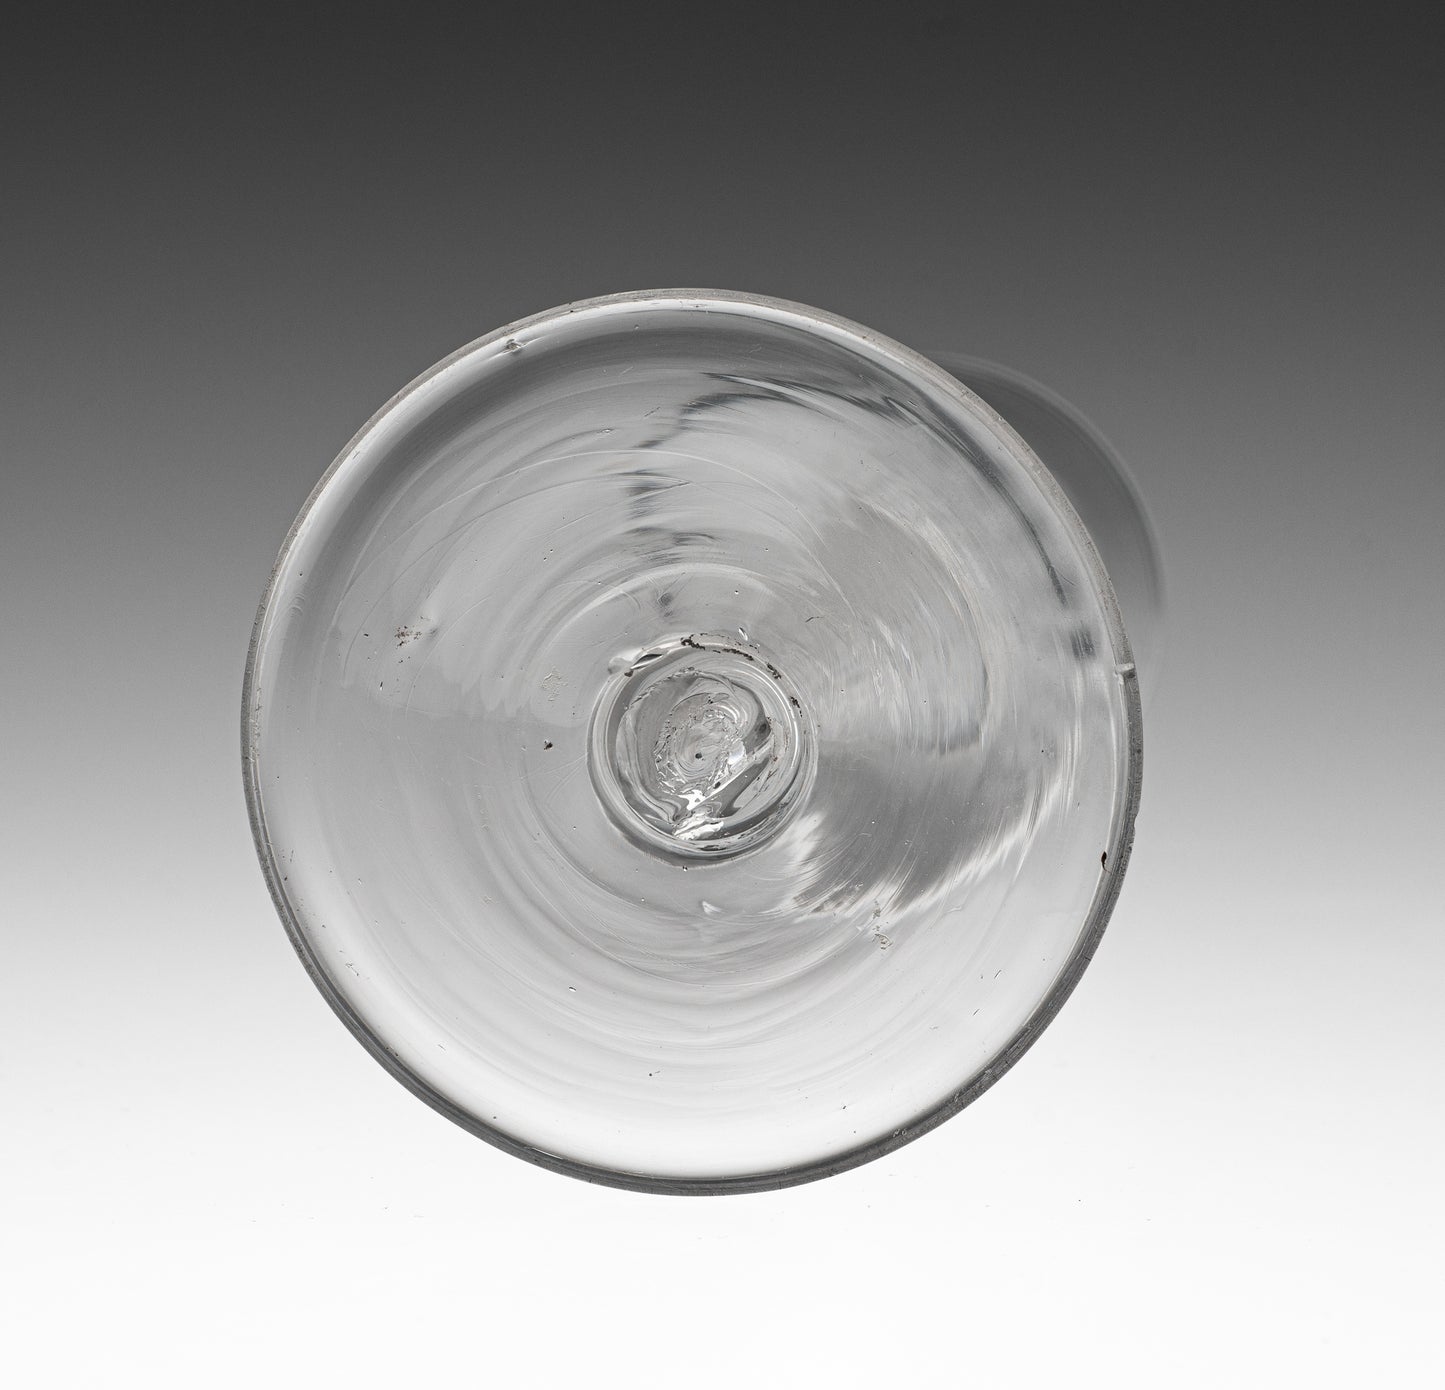 A Georgian Antique Double Series Opaque Twist Wine Glass with Ogee Bowl (Code 9343)